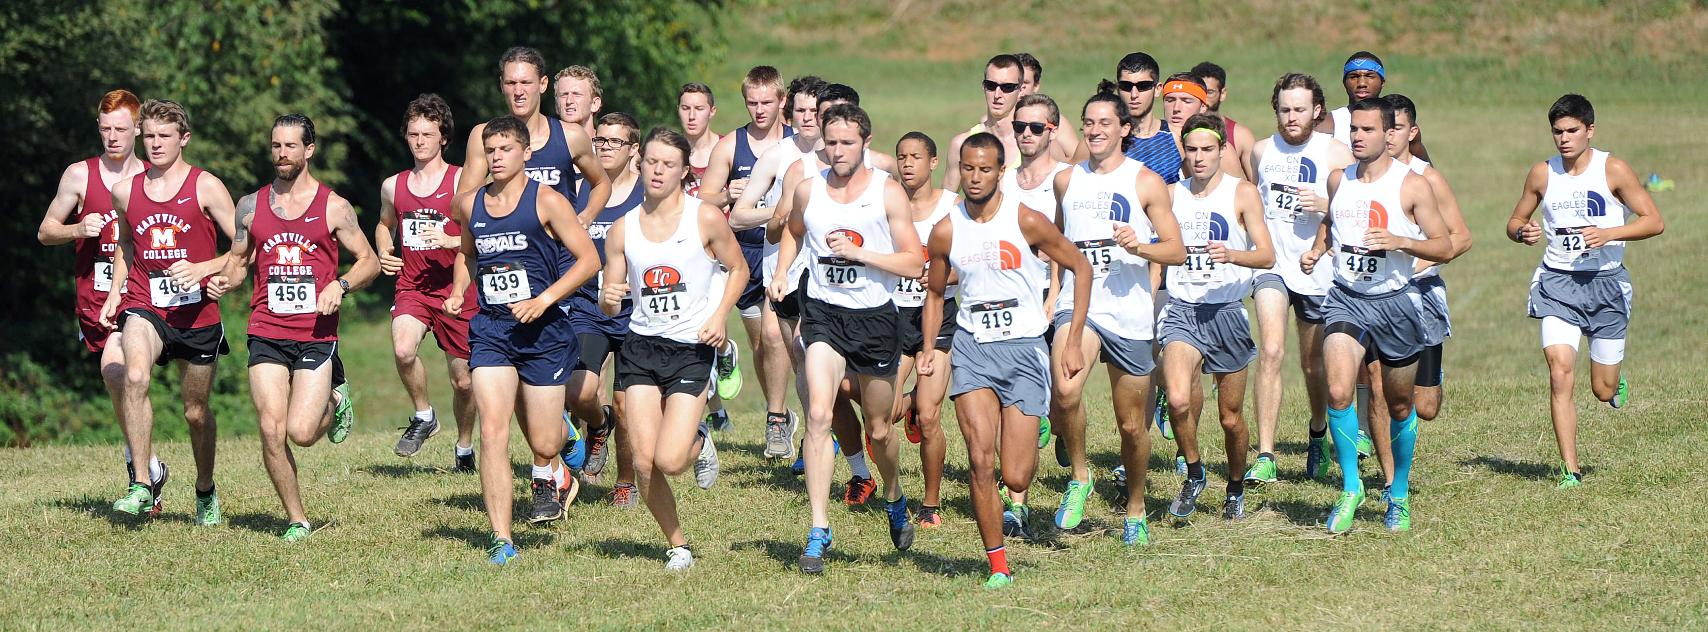 Women claim top-spot, men take second as Eagles compete in Tusculum Open